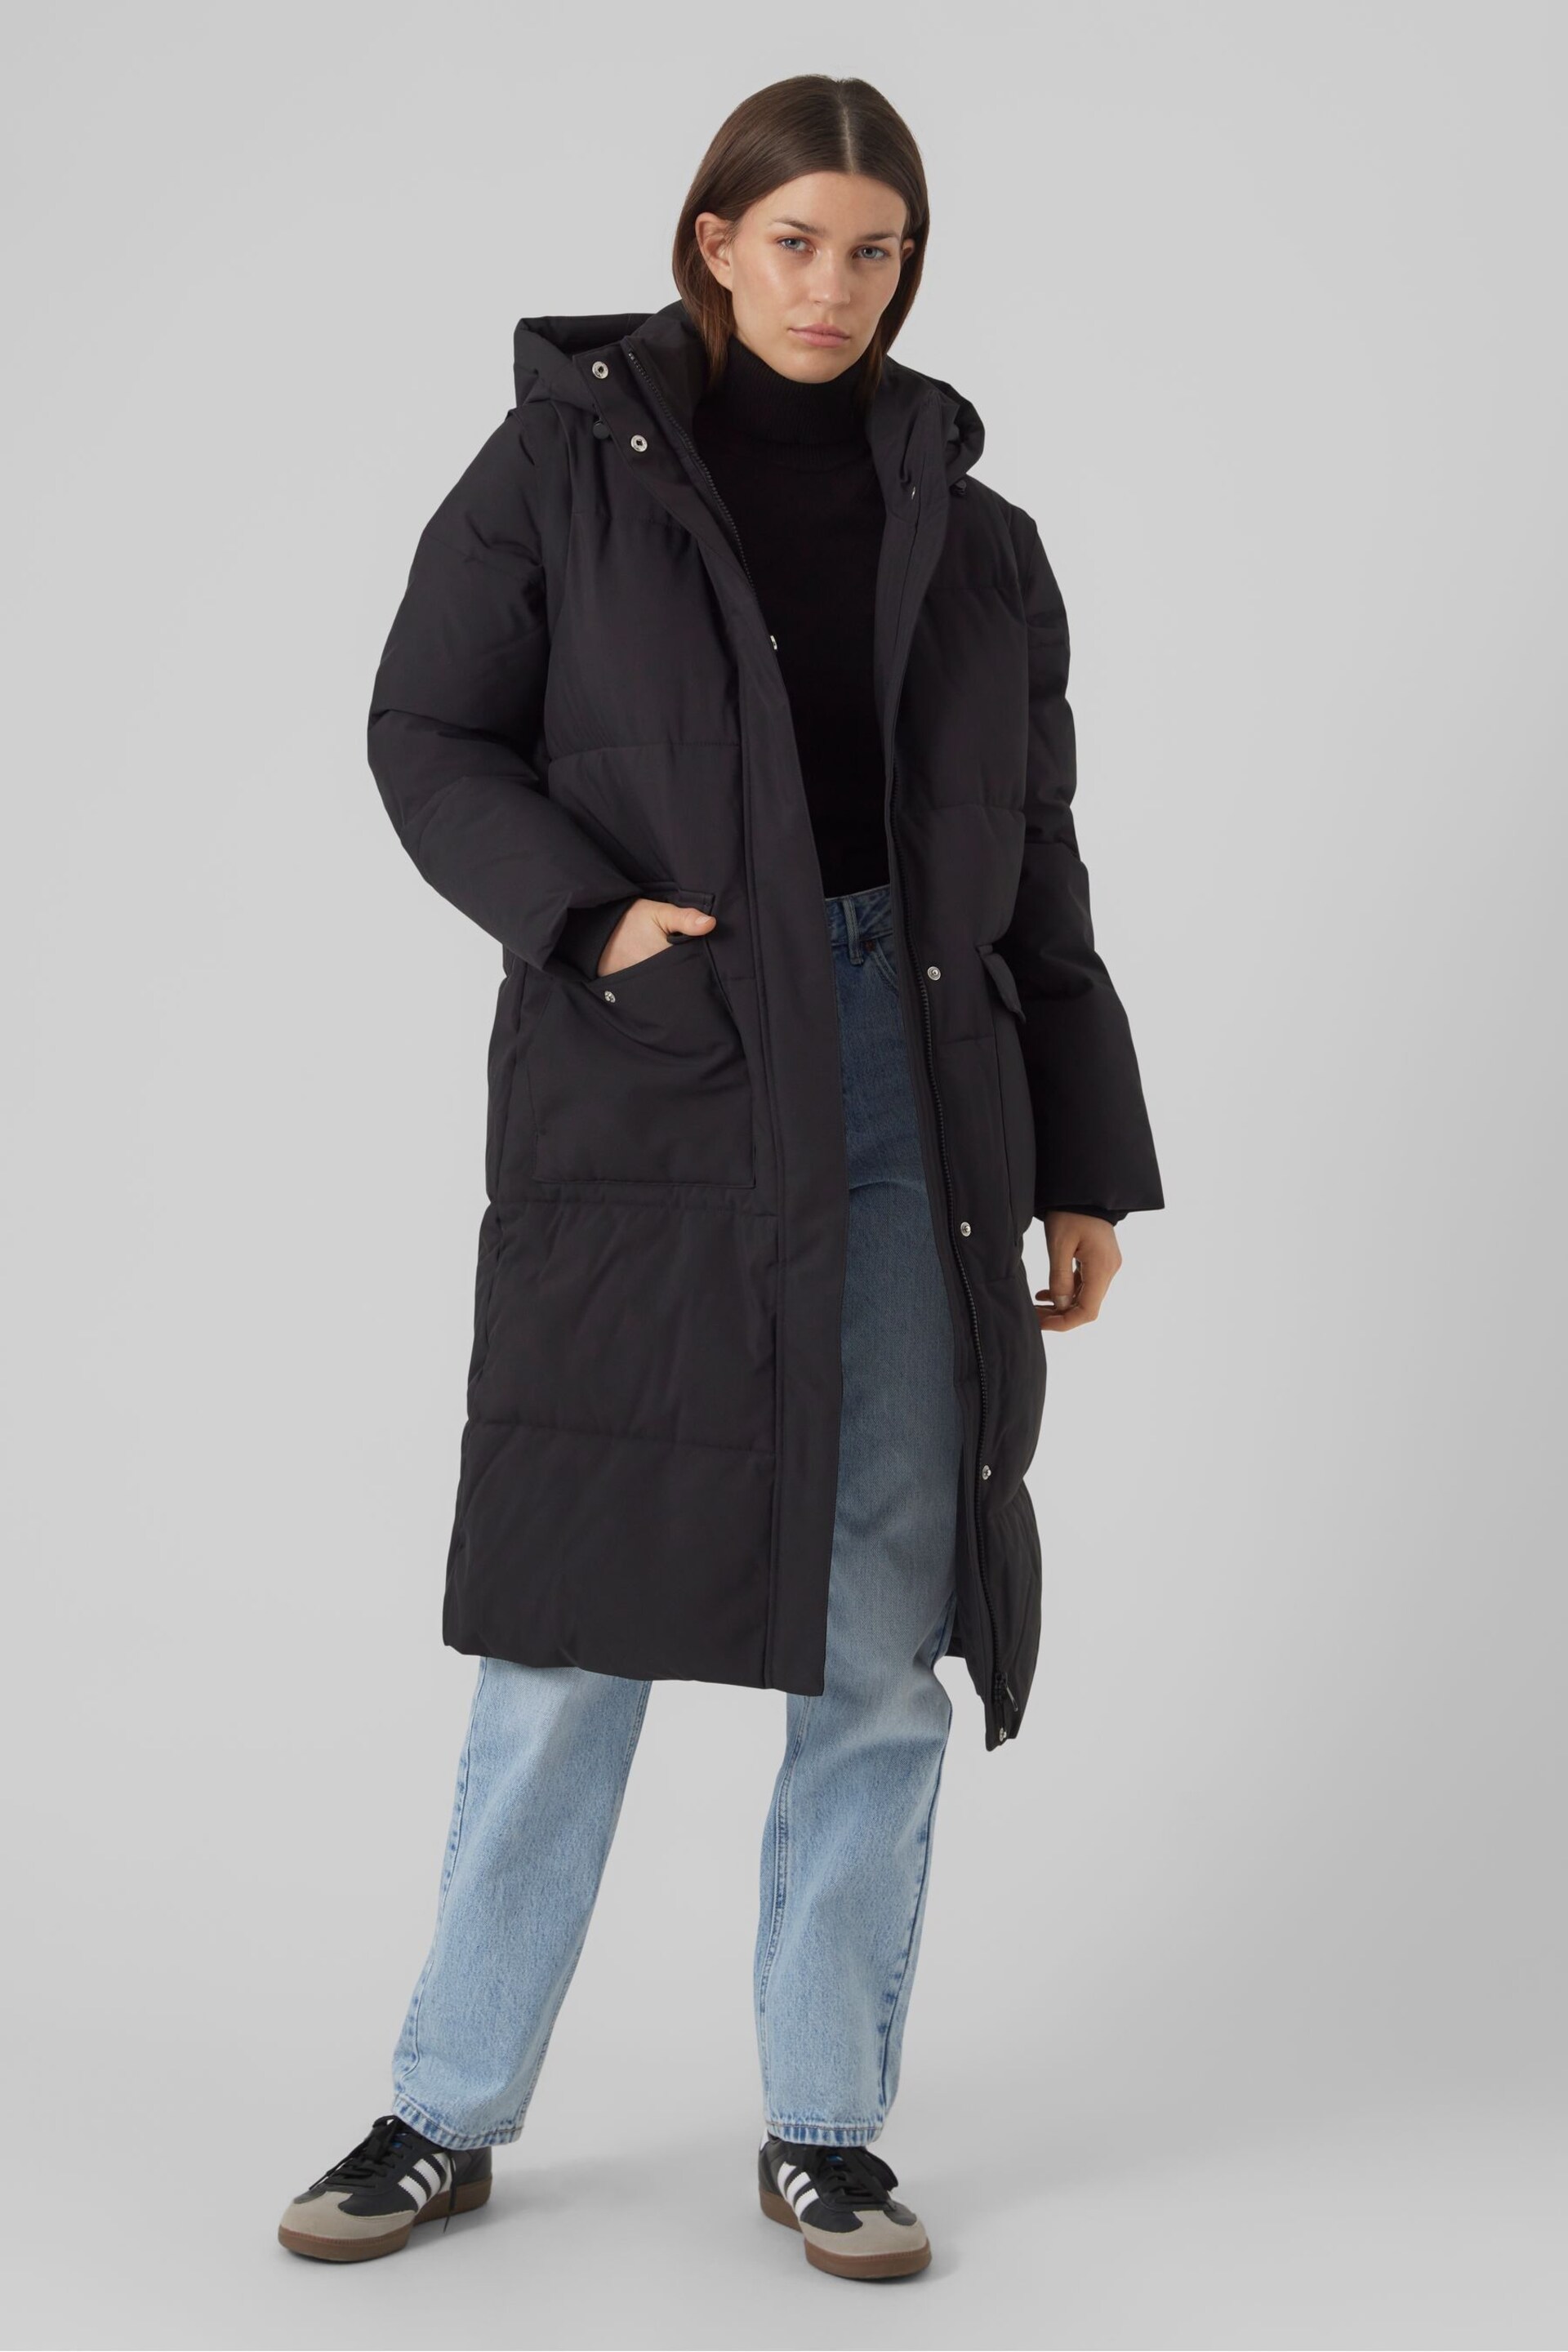 VERO MODA Black 2-In-1 Padded Coat And Gilet Set With Detachable Sleeves - Image 3 of 5